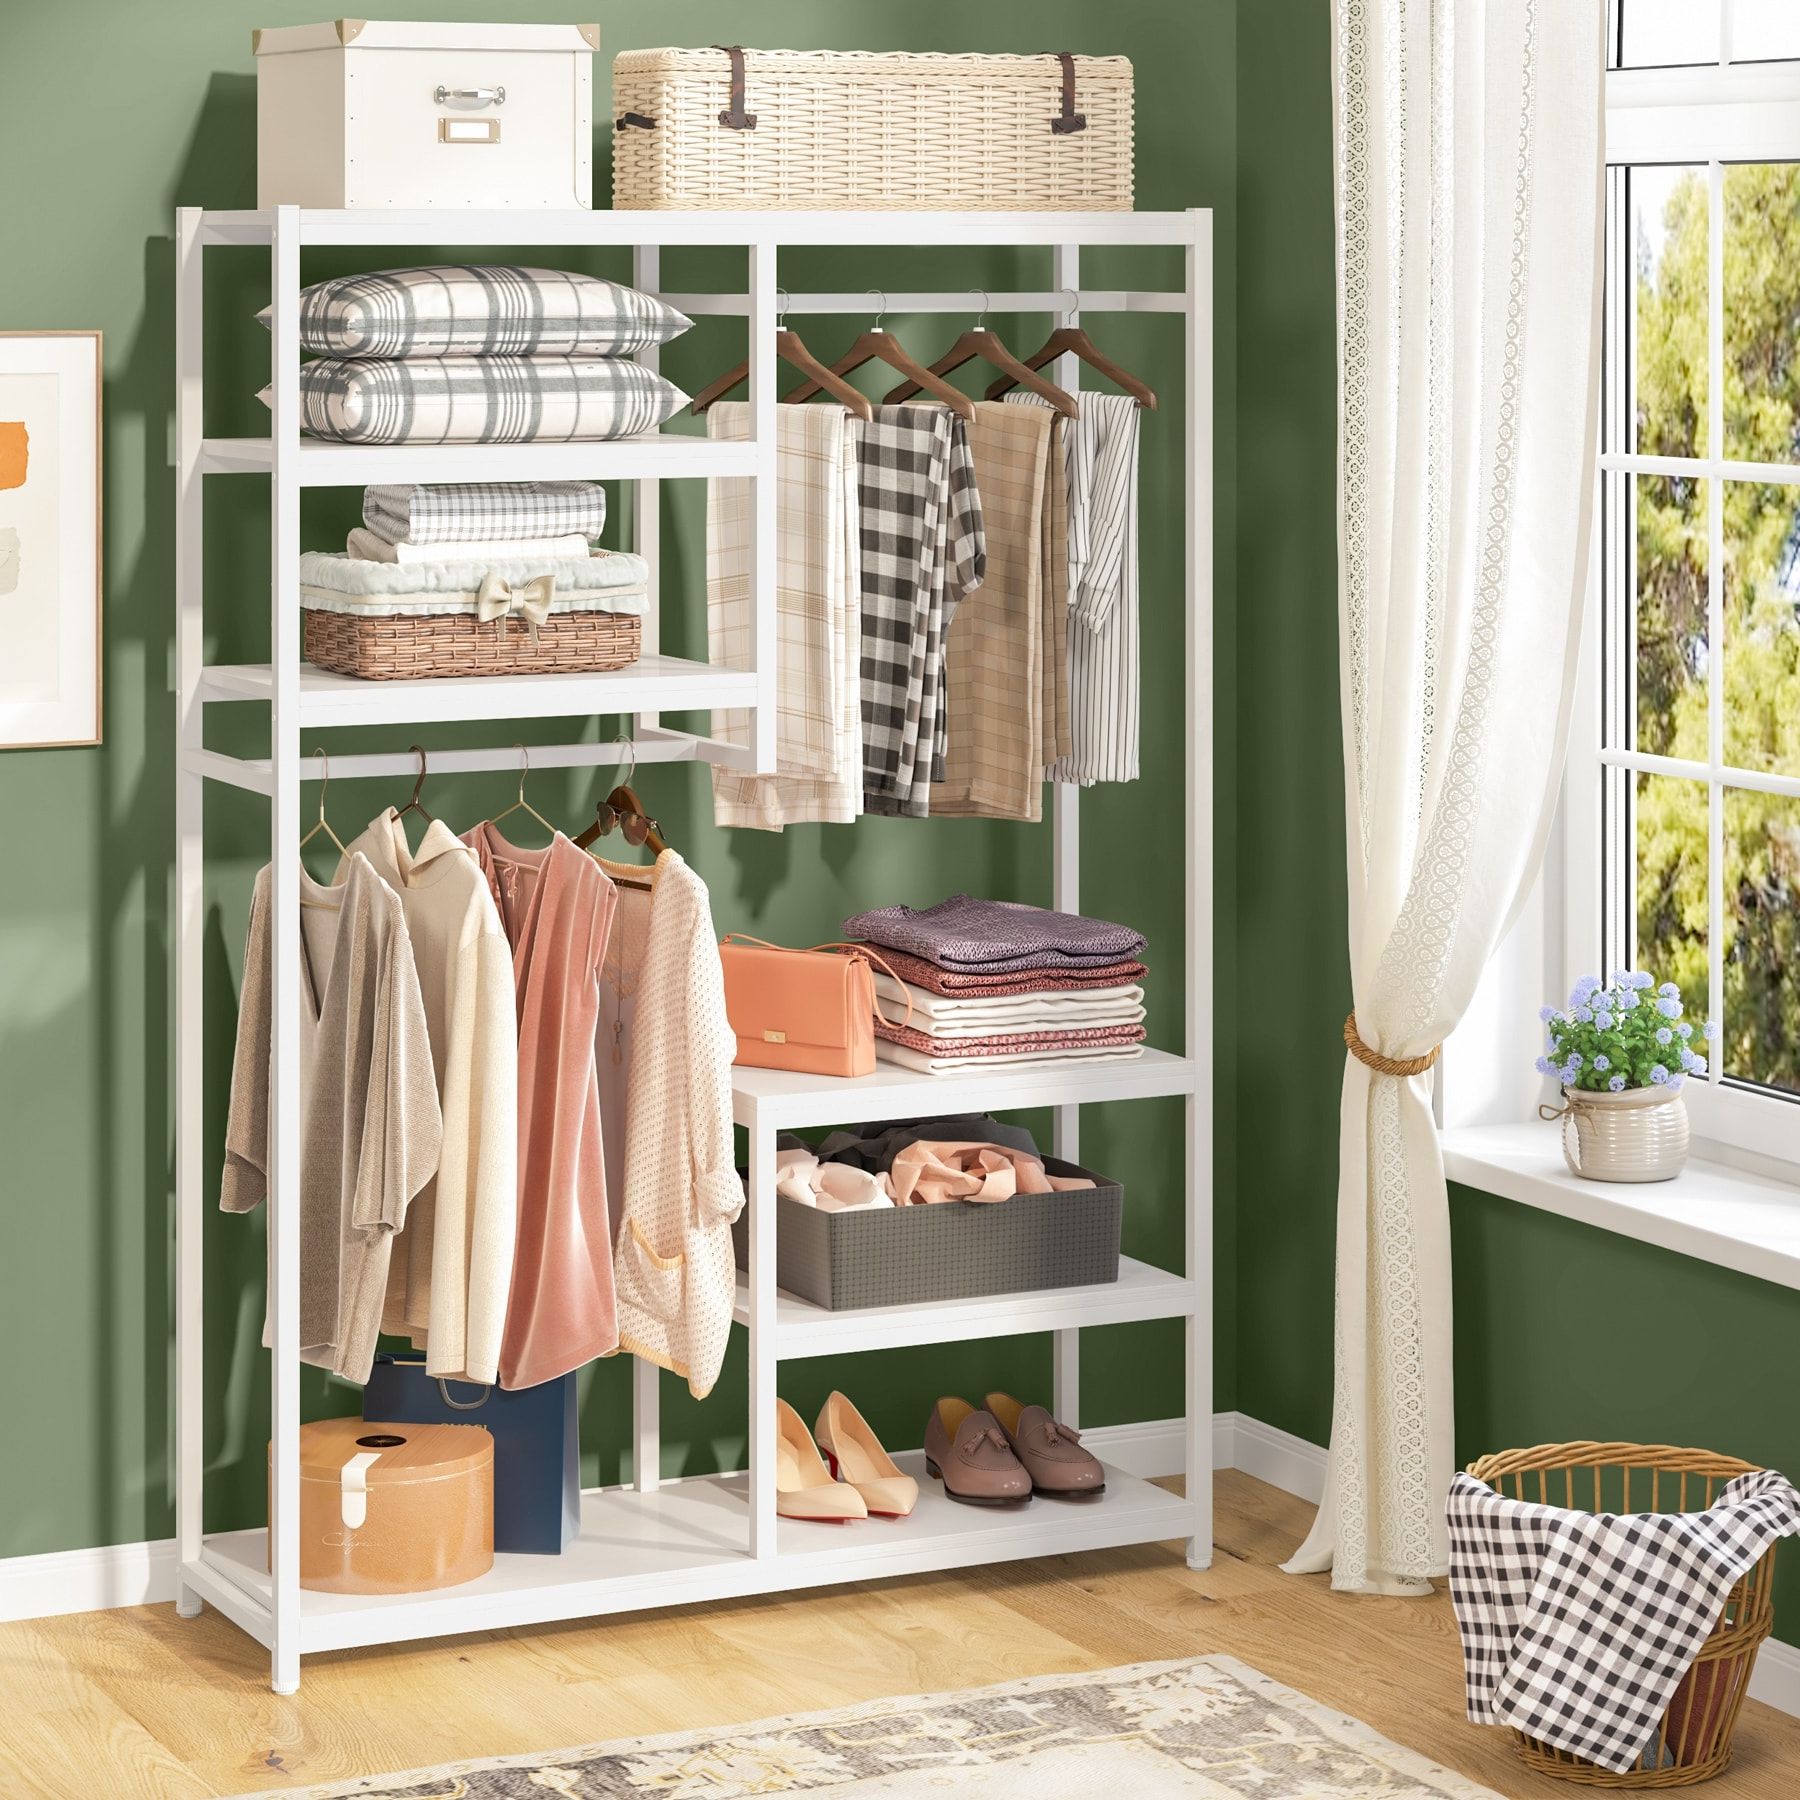 Free Standing Closet Organizer Double Hanging Rod Clothes Garment Racks –  Bed Bath & Beyond – 30537676 For Standing Closet Clothes Storage Wardrobes (Gallery 17 of 20)